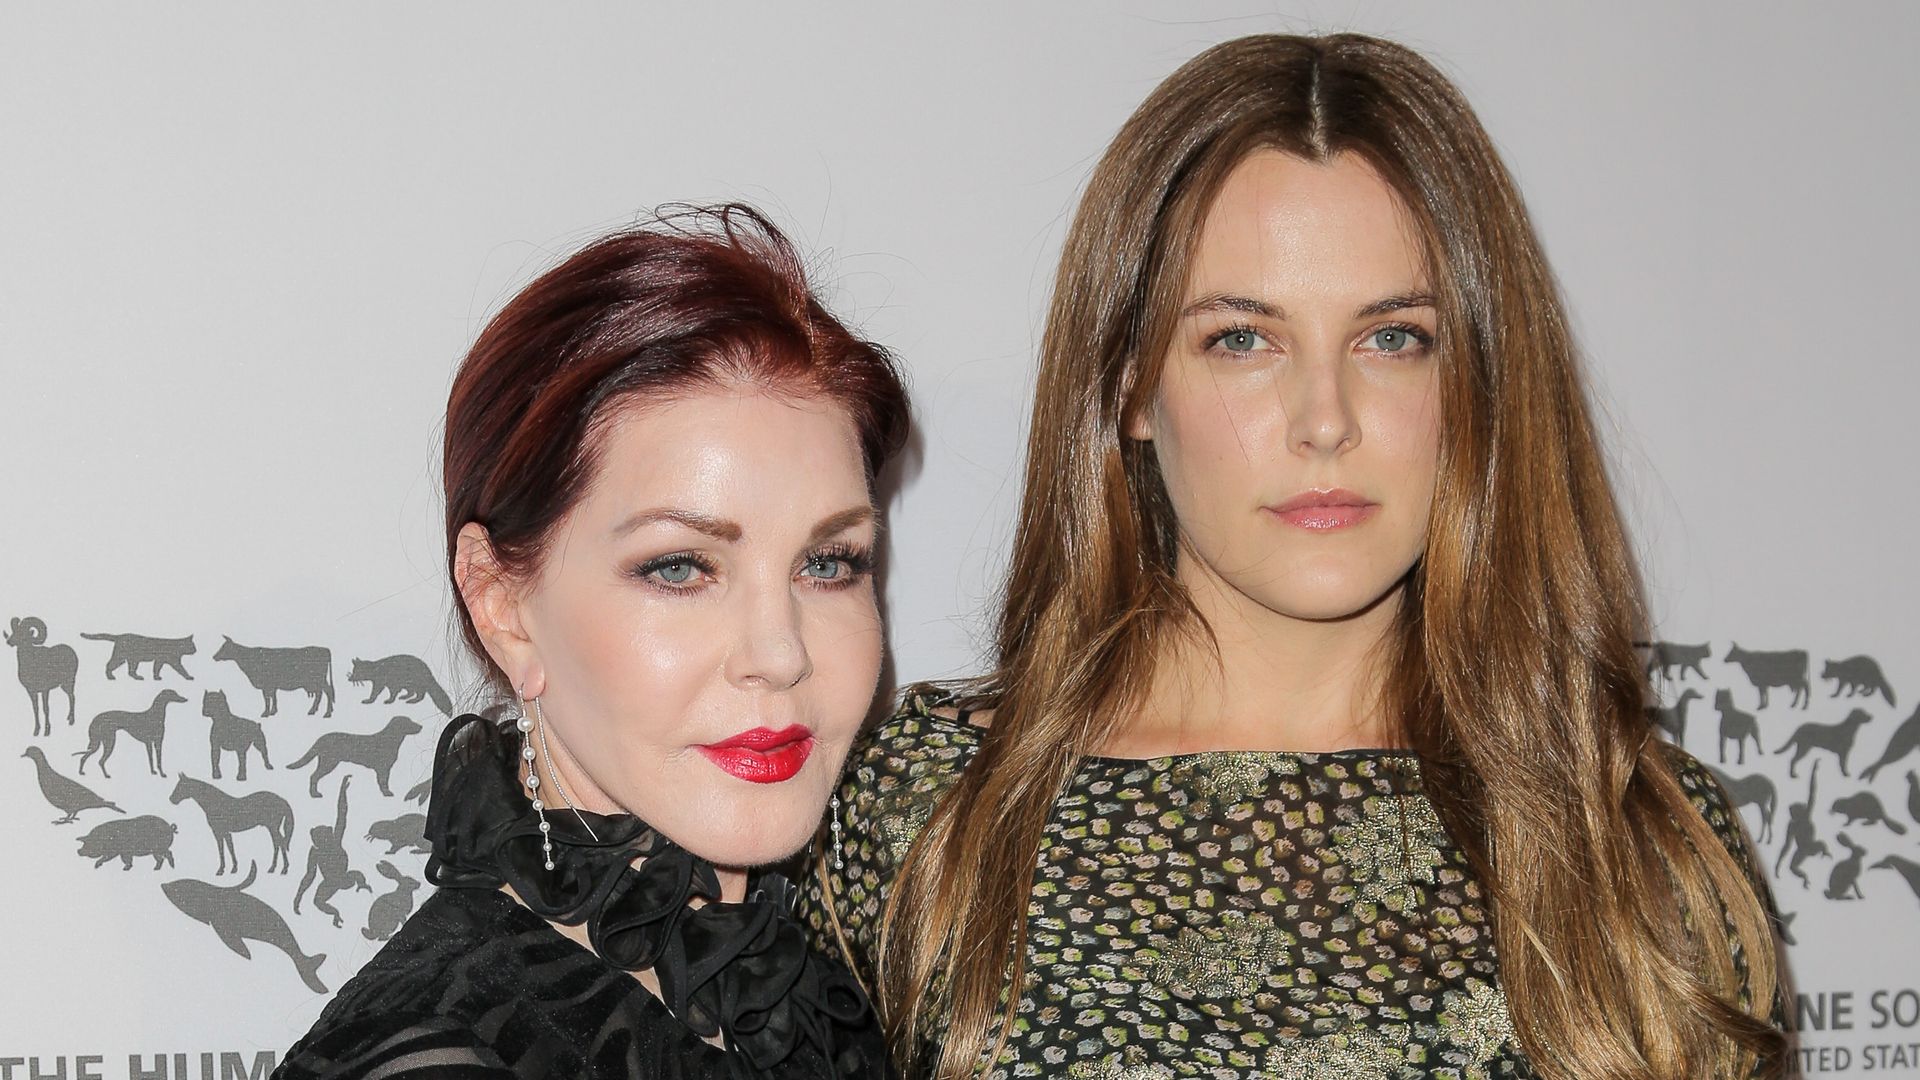 Priscilla Presley and Riley Keough at the The Humane Society of the United States Gala, Los Angeles, America - 07 May 2016